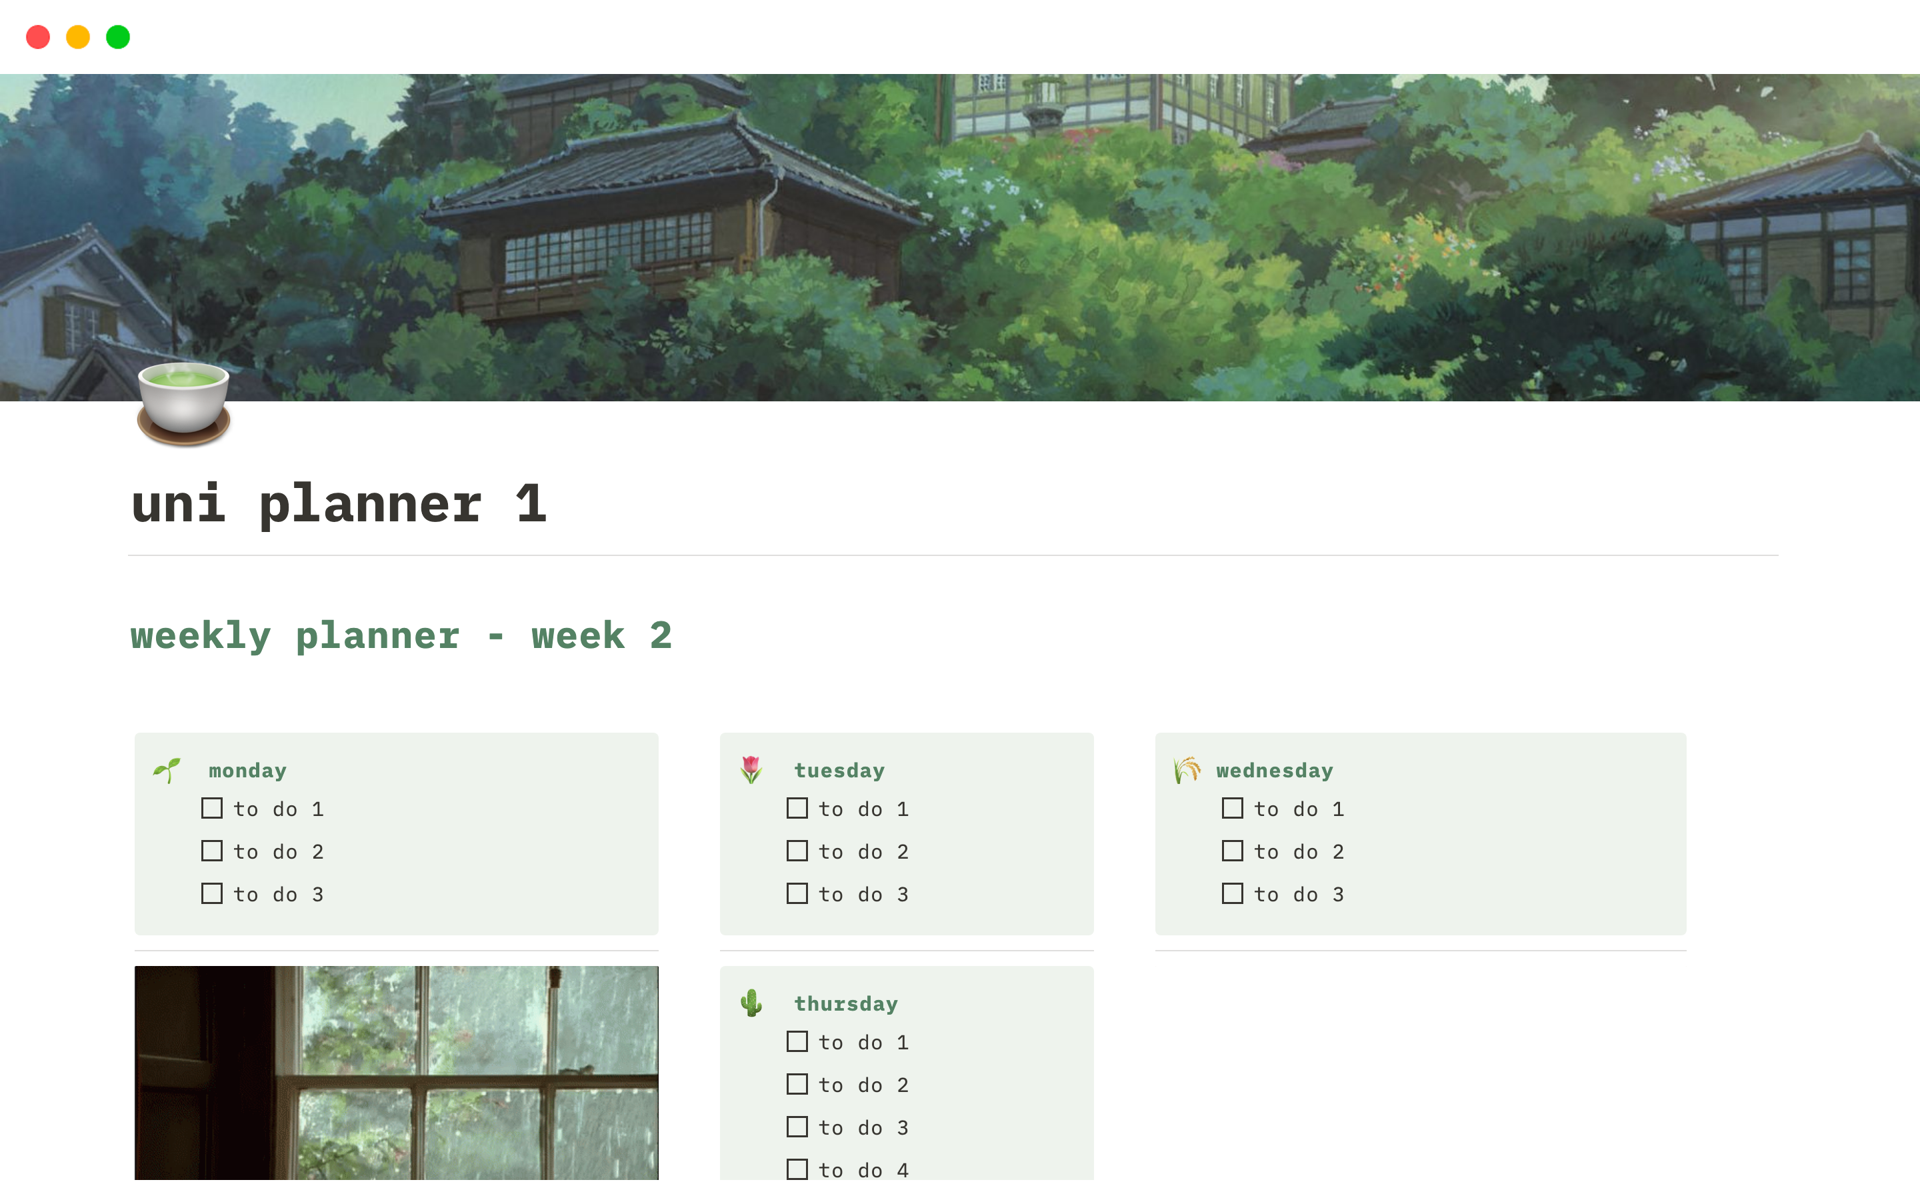 An aesthetic and calming green-themed planner for students to manage weekly activities, study progress and assignments related to school/university.